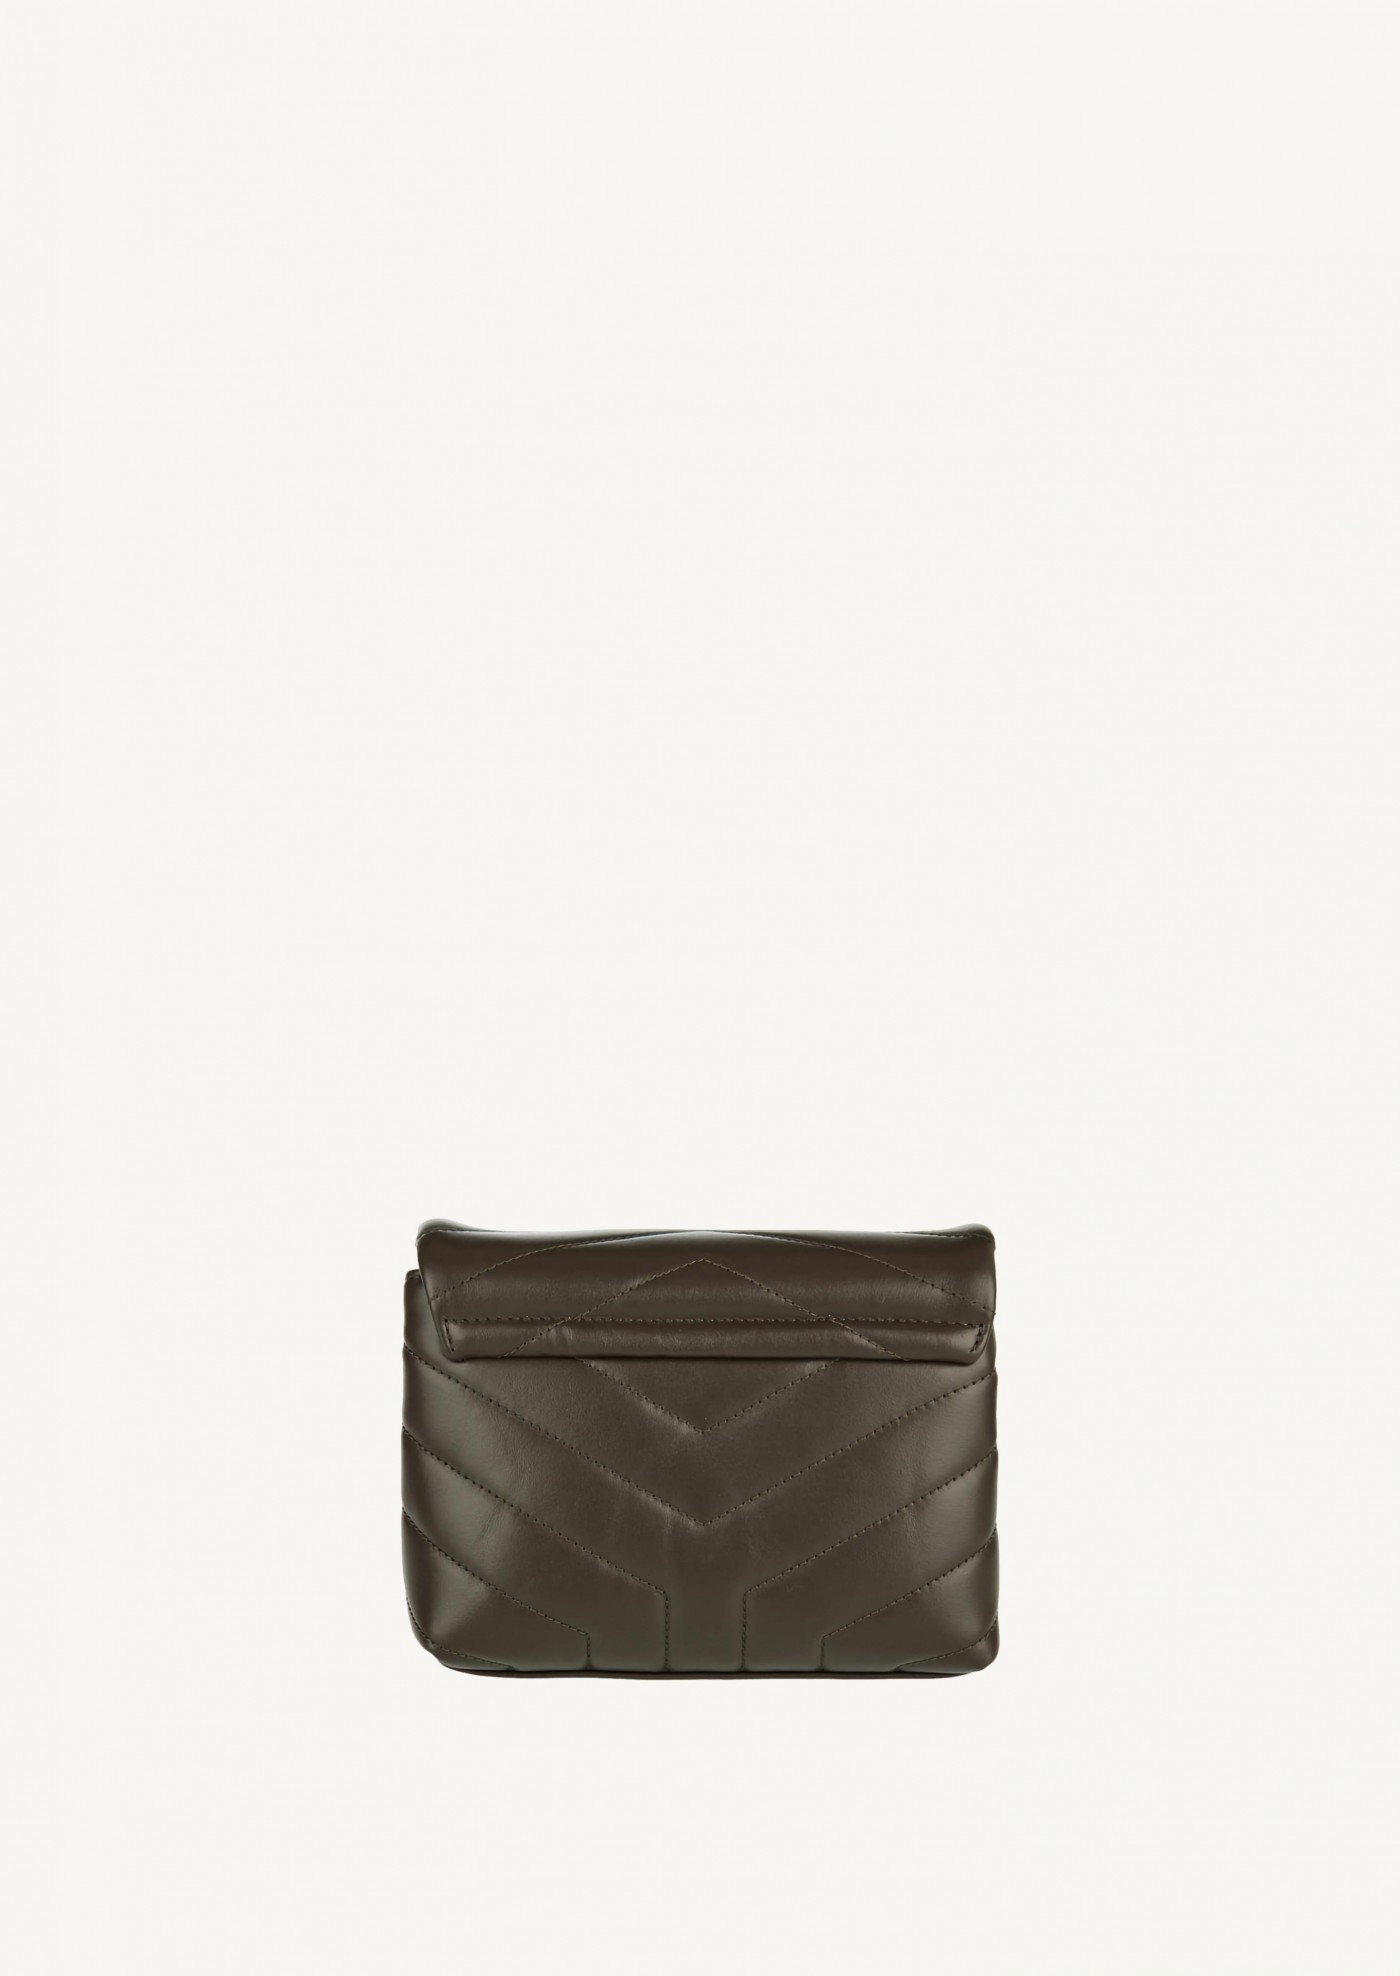 Loulou toy in khaki quilted leather